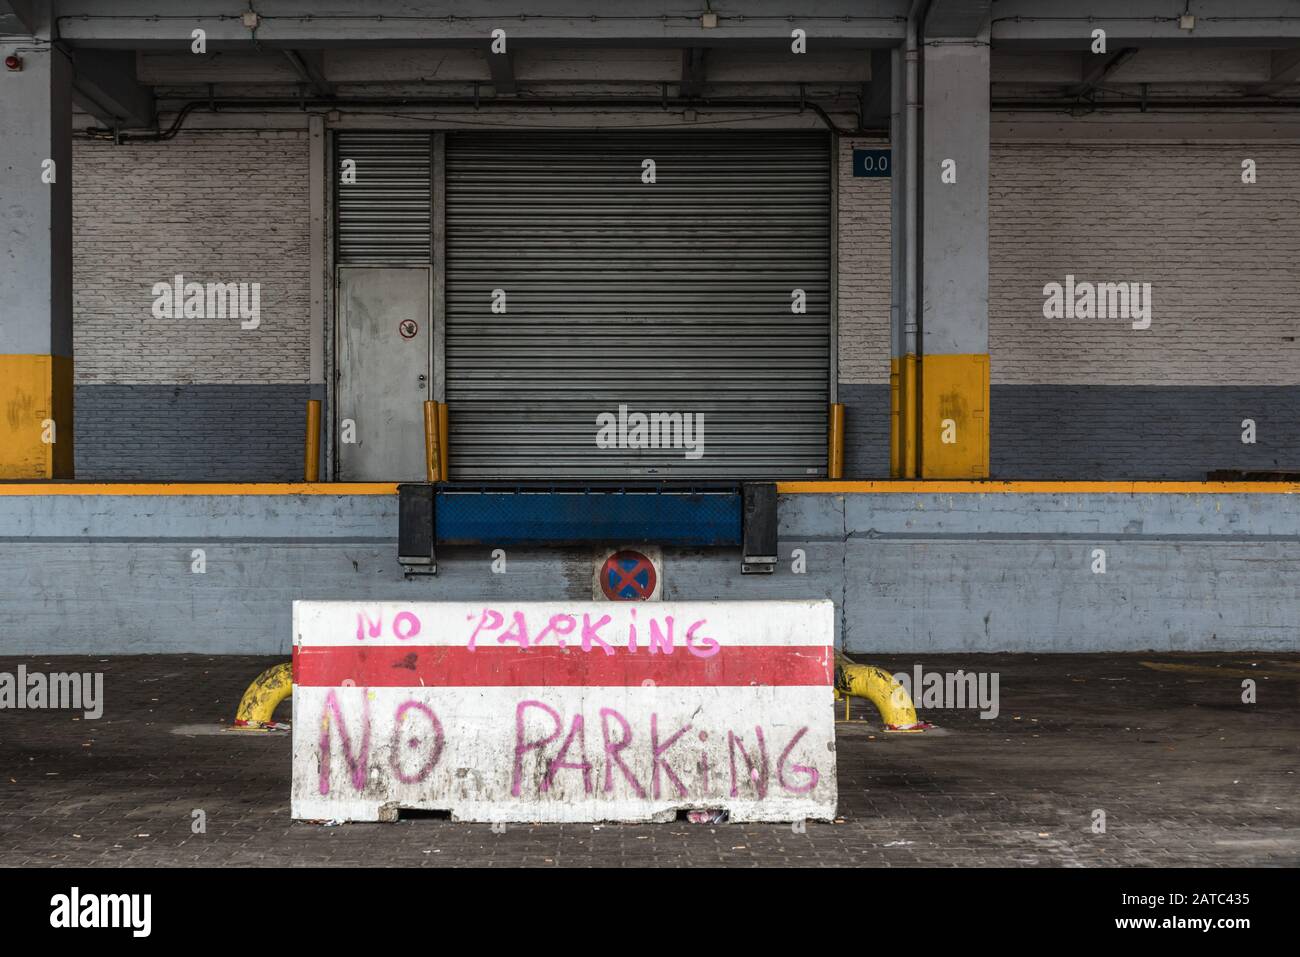 Laeken, Brussels Capital Region / Belgium - 09 26 2019: Loading dock for trucks on an Industrial site with a no parking tag Stock Photo